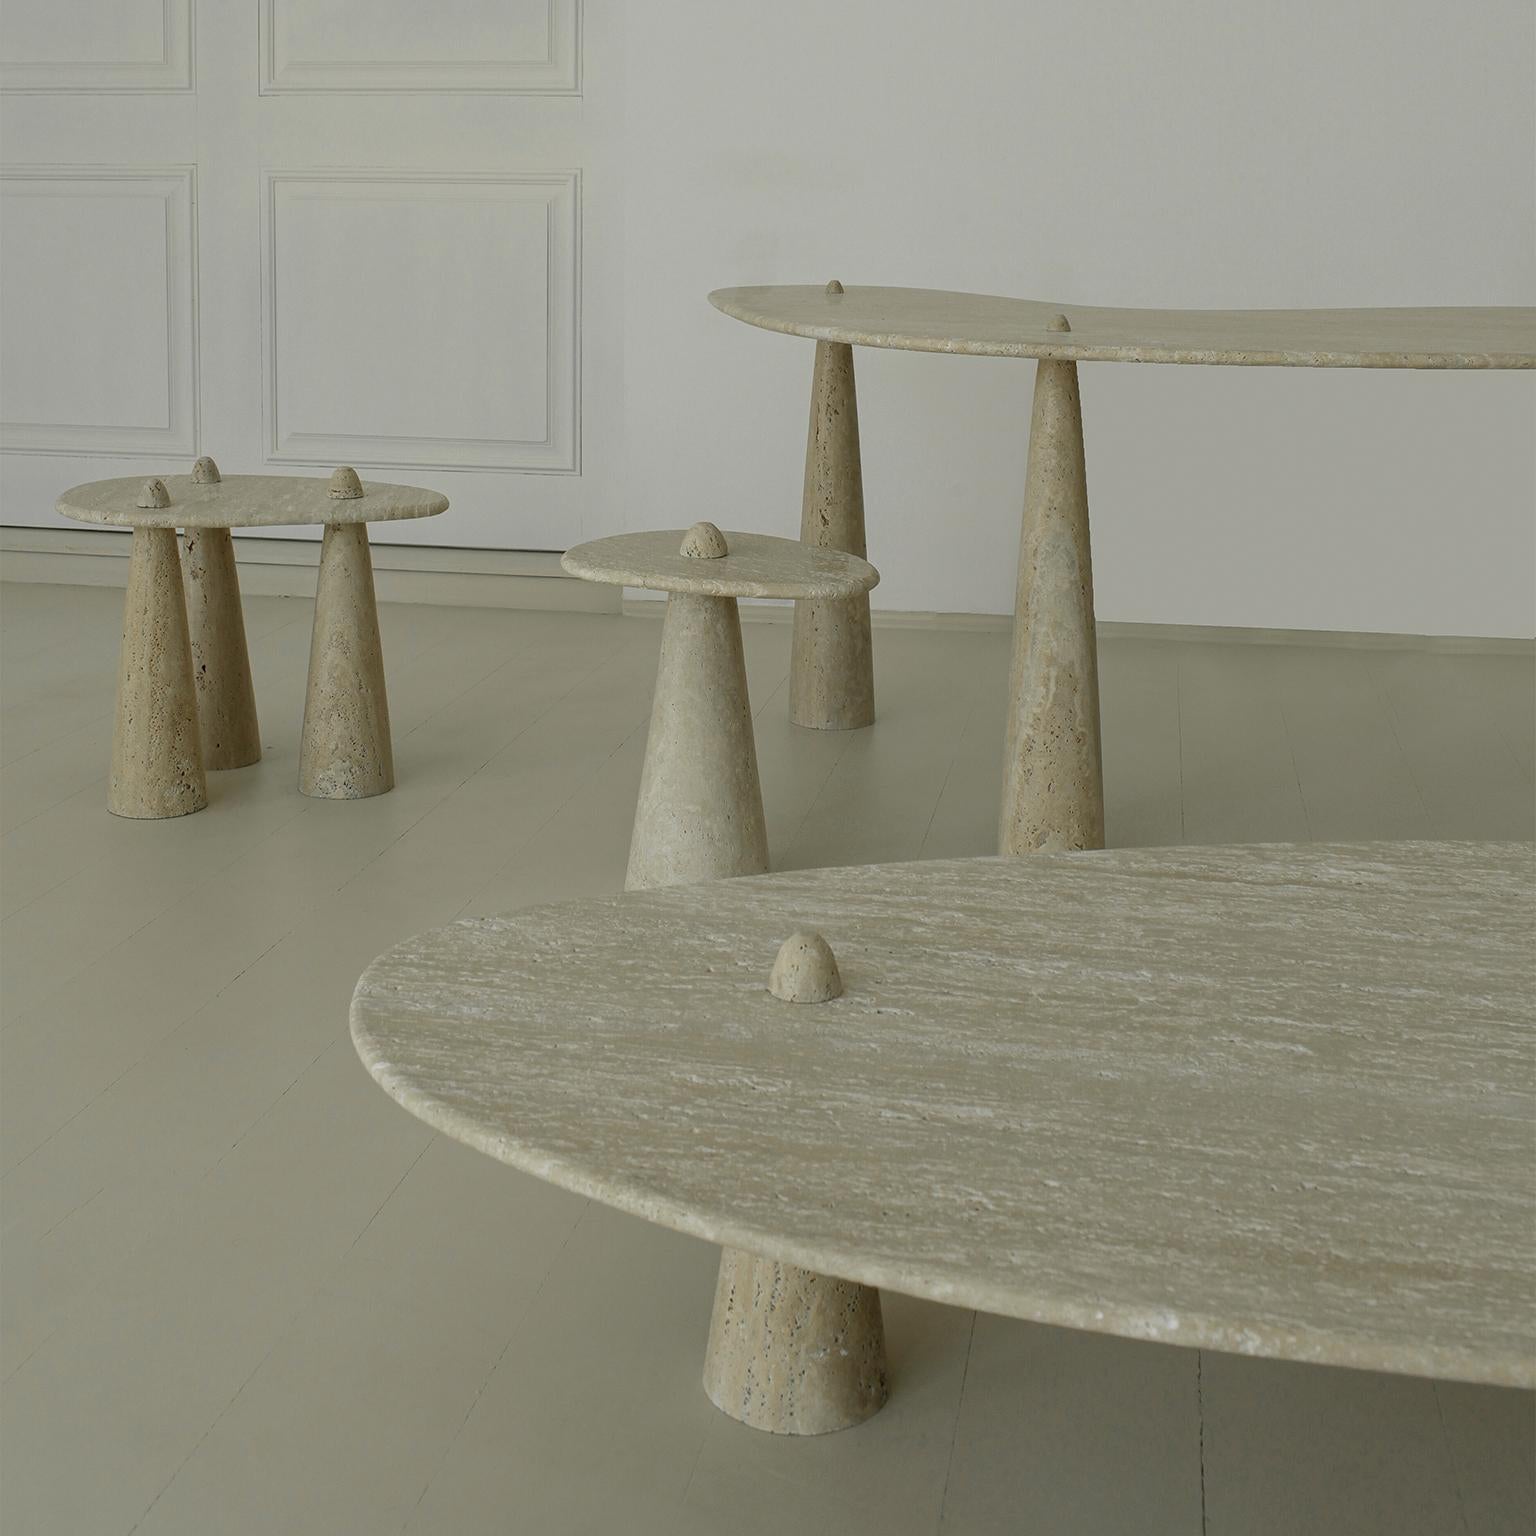 This Contemporary Side Table was meticulously handmade by master artisans one piece at a time. It is therefore quite difficult, if not impossible to make identical items. The projects are based on a contemporary appropriation of traditional methods